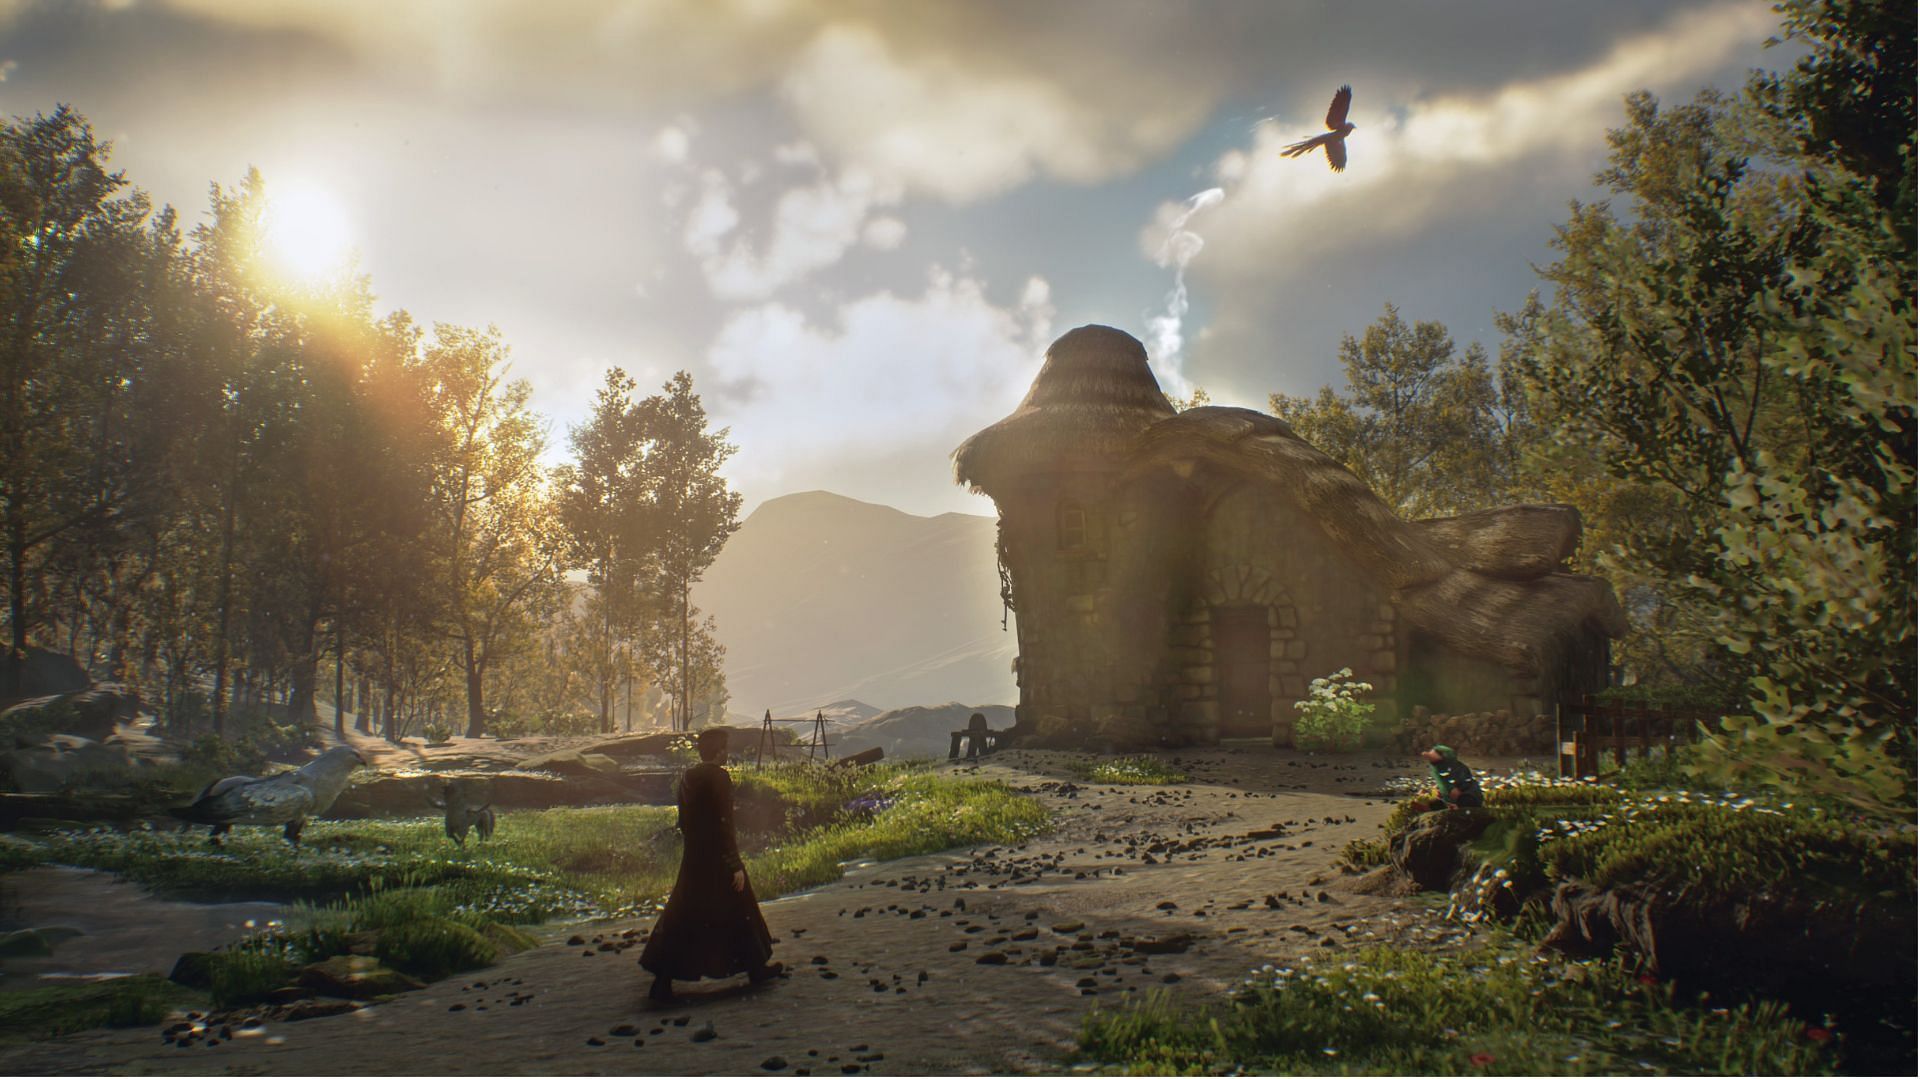 The open-world game Hogwarts Legacy is set to release later this year (Image via WB)